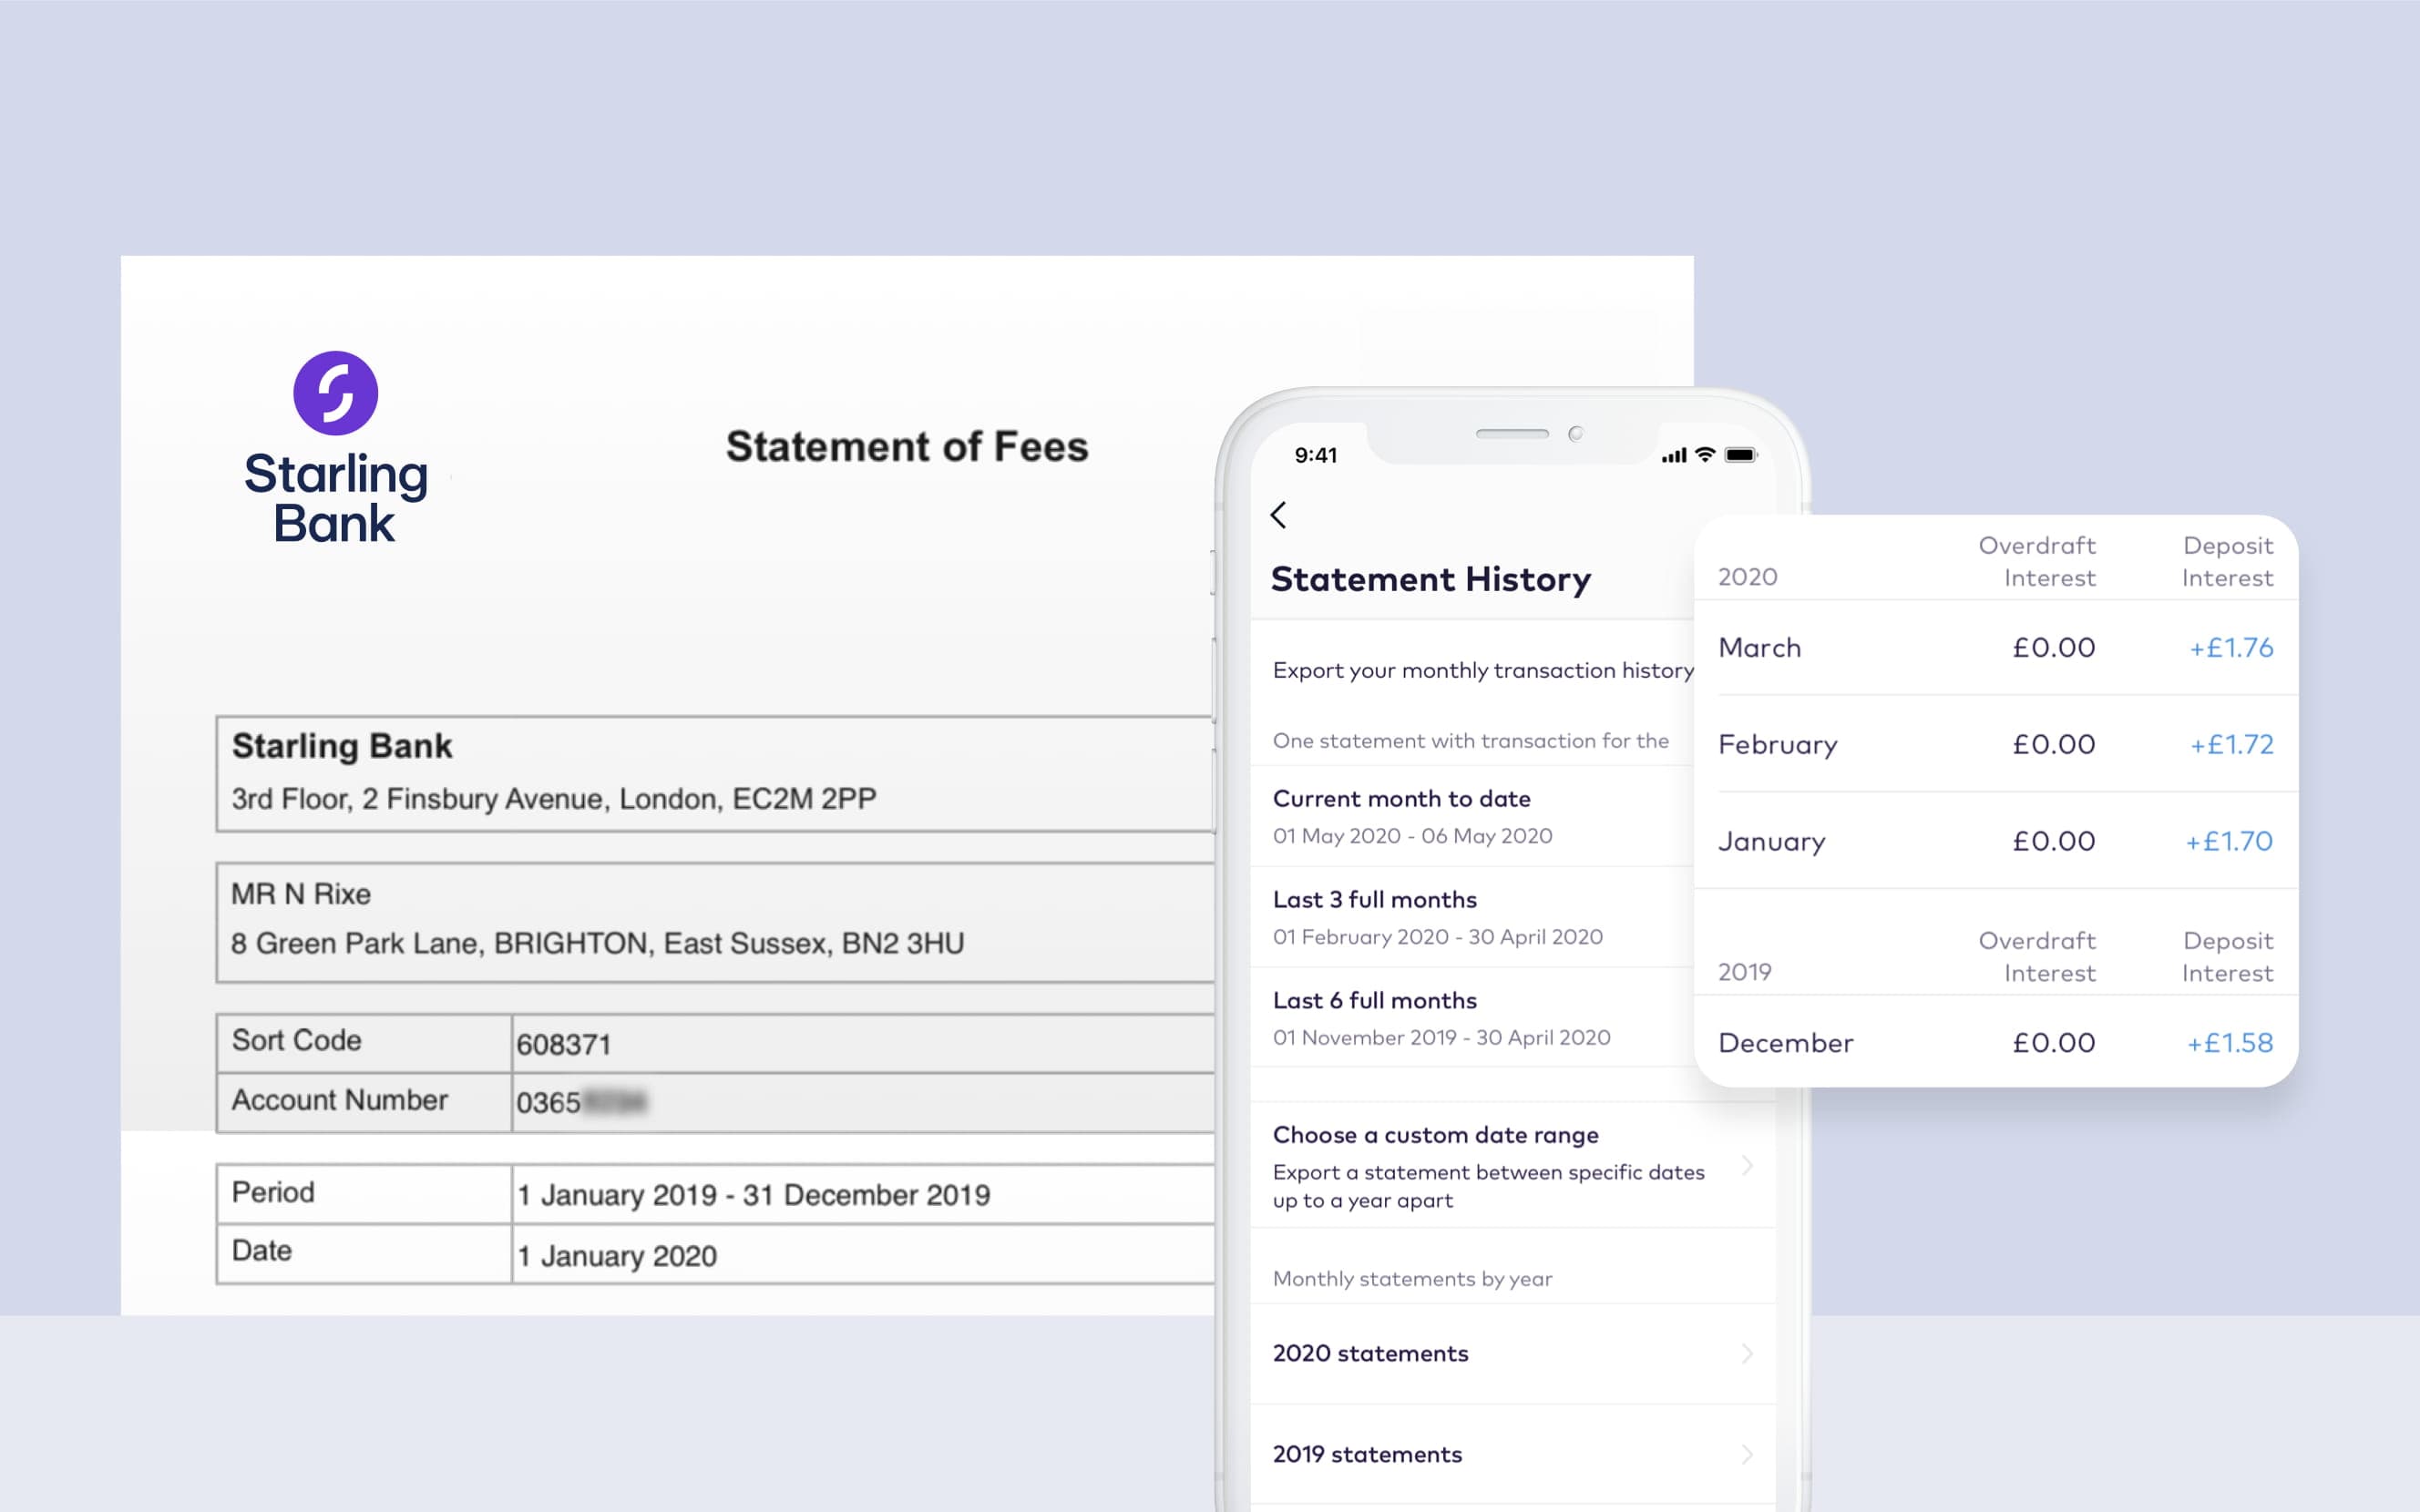 Statement of Fees and Statement History in the app